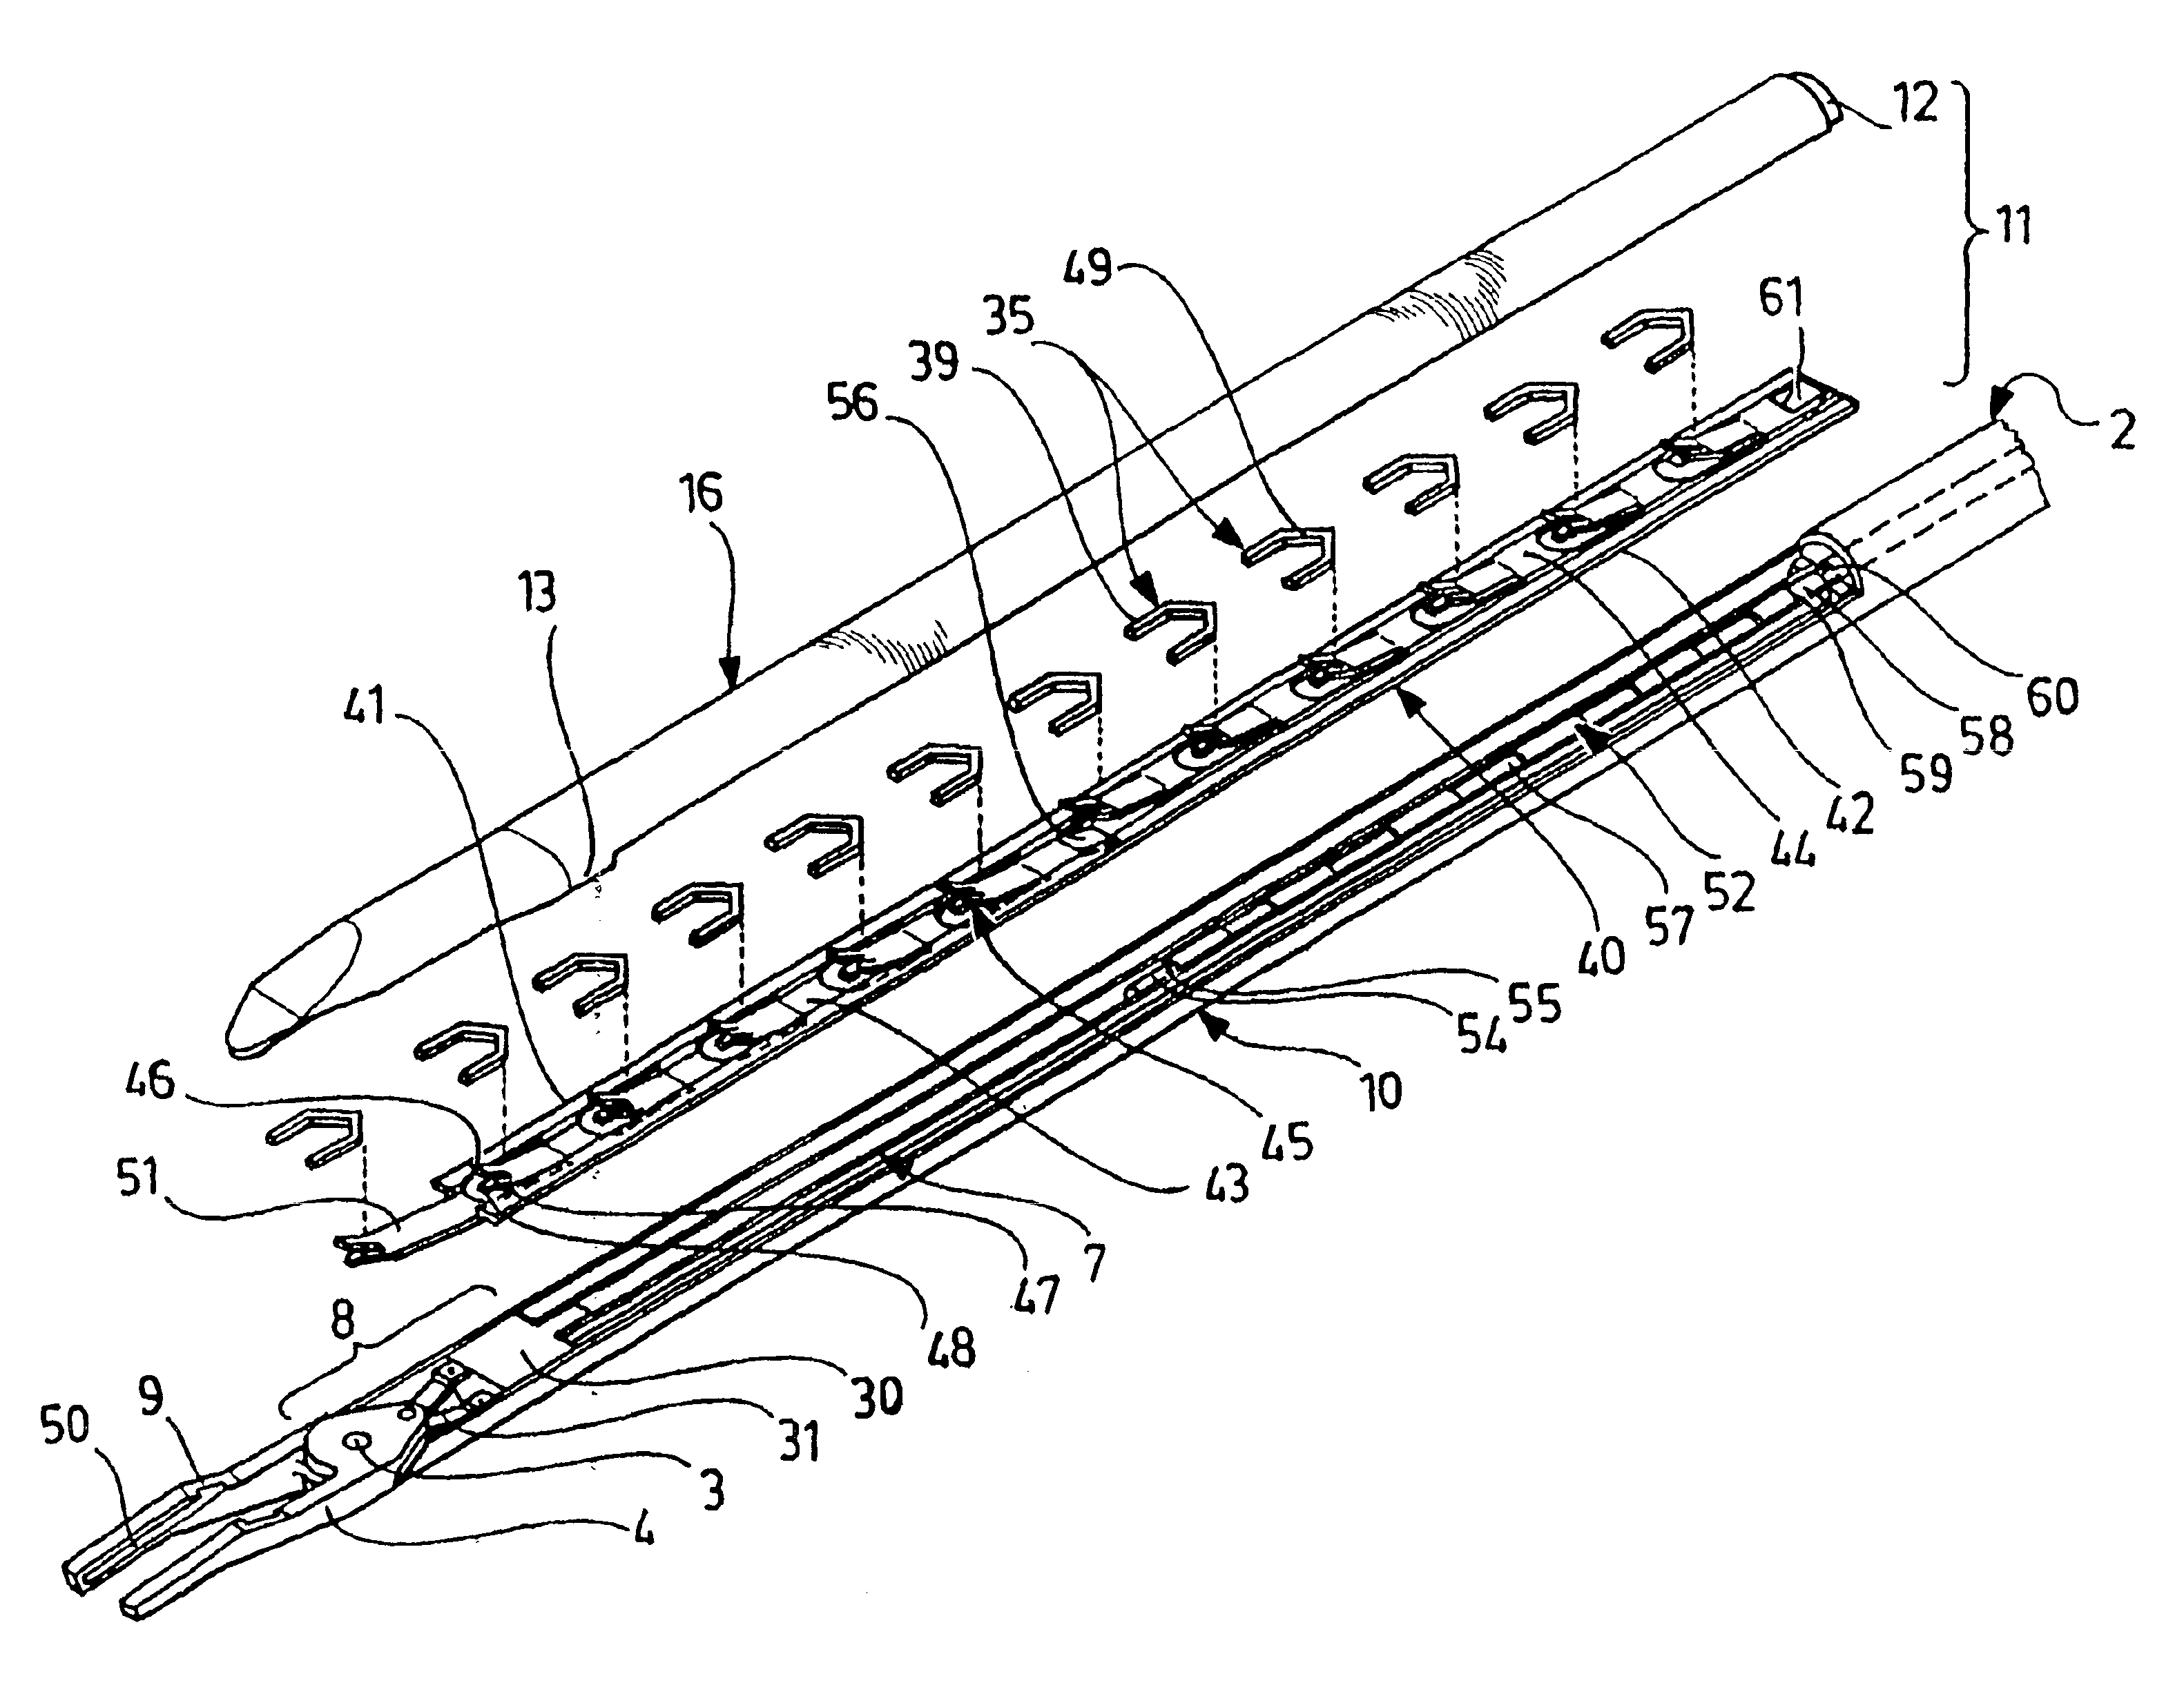 Instrument for placing surgical clips